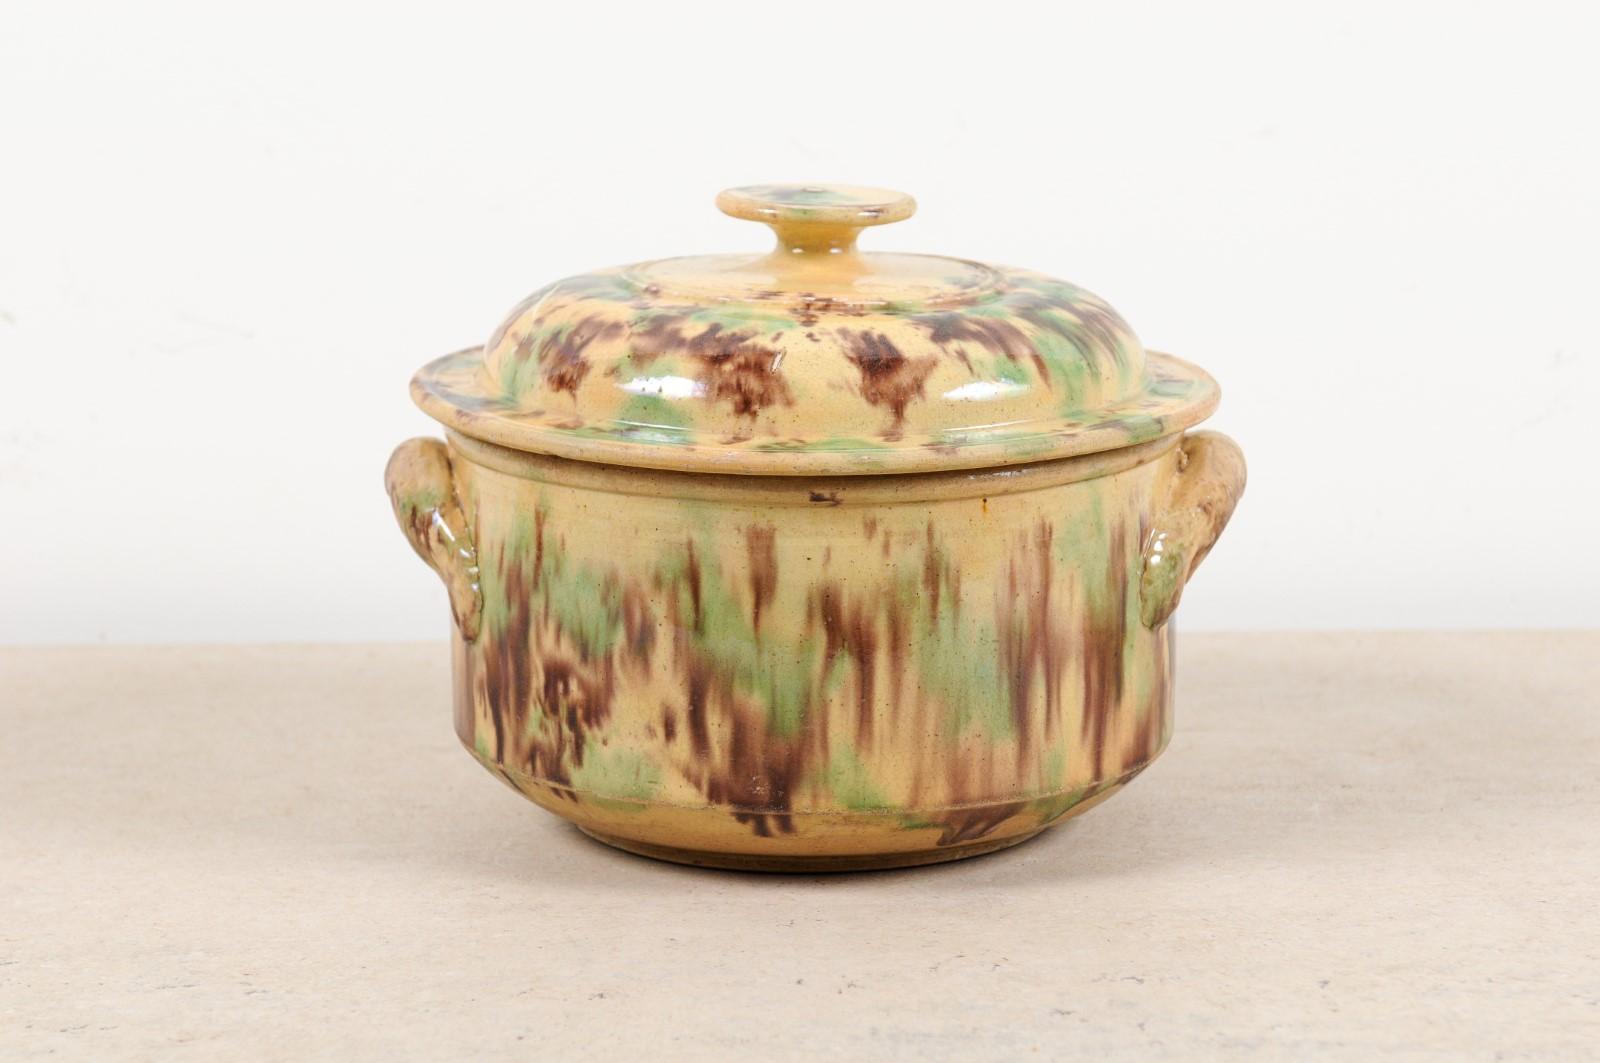 A French glazed ceramic casserole dish from the 19th century, with lid and handles. Charming us with its brown and green glaze that seems to be melting along the sides of its simple body, this casserole dish showcases a circular lid resting upon a